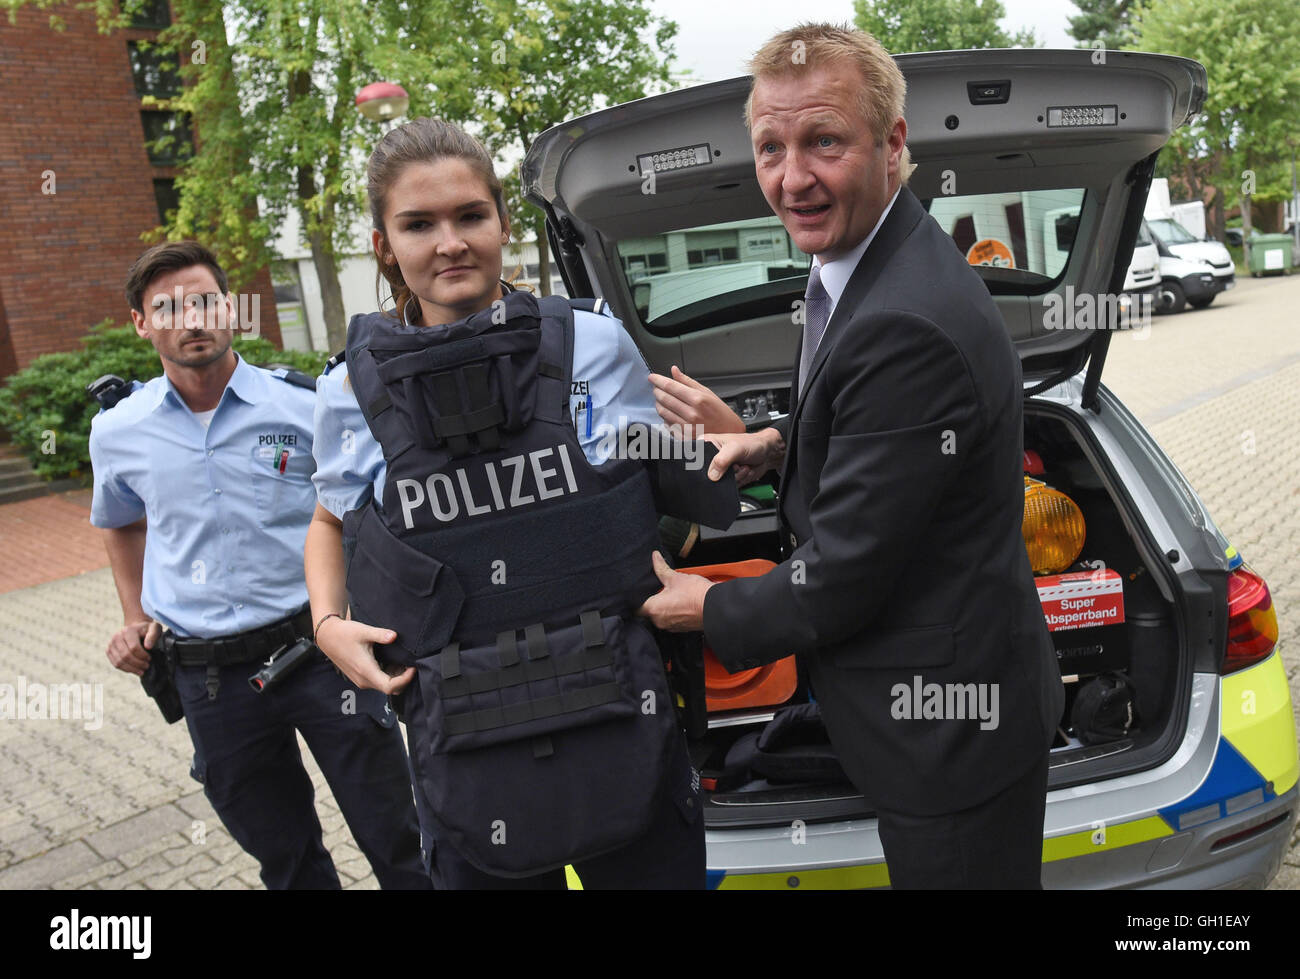 Cologne, Germany. 8th Aug, 2016. Two police officers and Minister of the Interior in North Rhine-Westphalia Ralf Jaeger (SPD, r) presenting the new protective vest during a press call in Cologne, Germany, 8 August 2016. The new vests are said to even withstand bullets shot by automatic weapons. PHOTO: HENNING KAISER/dpa/Alamy Live News Stock Photo